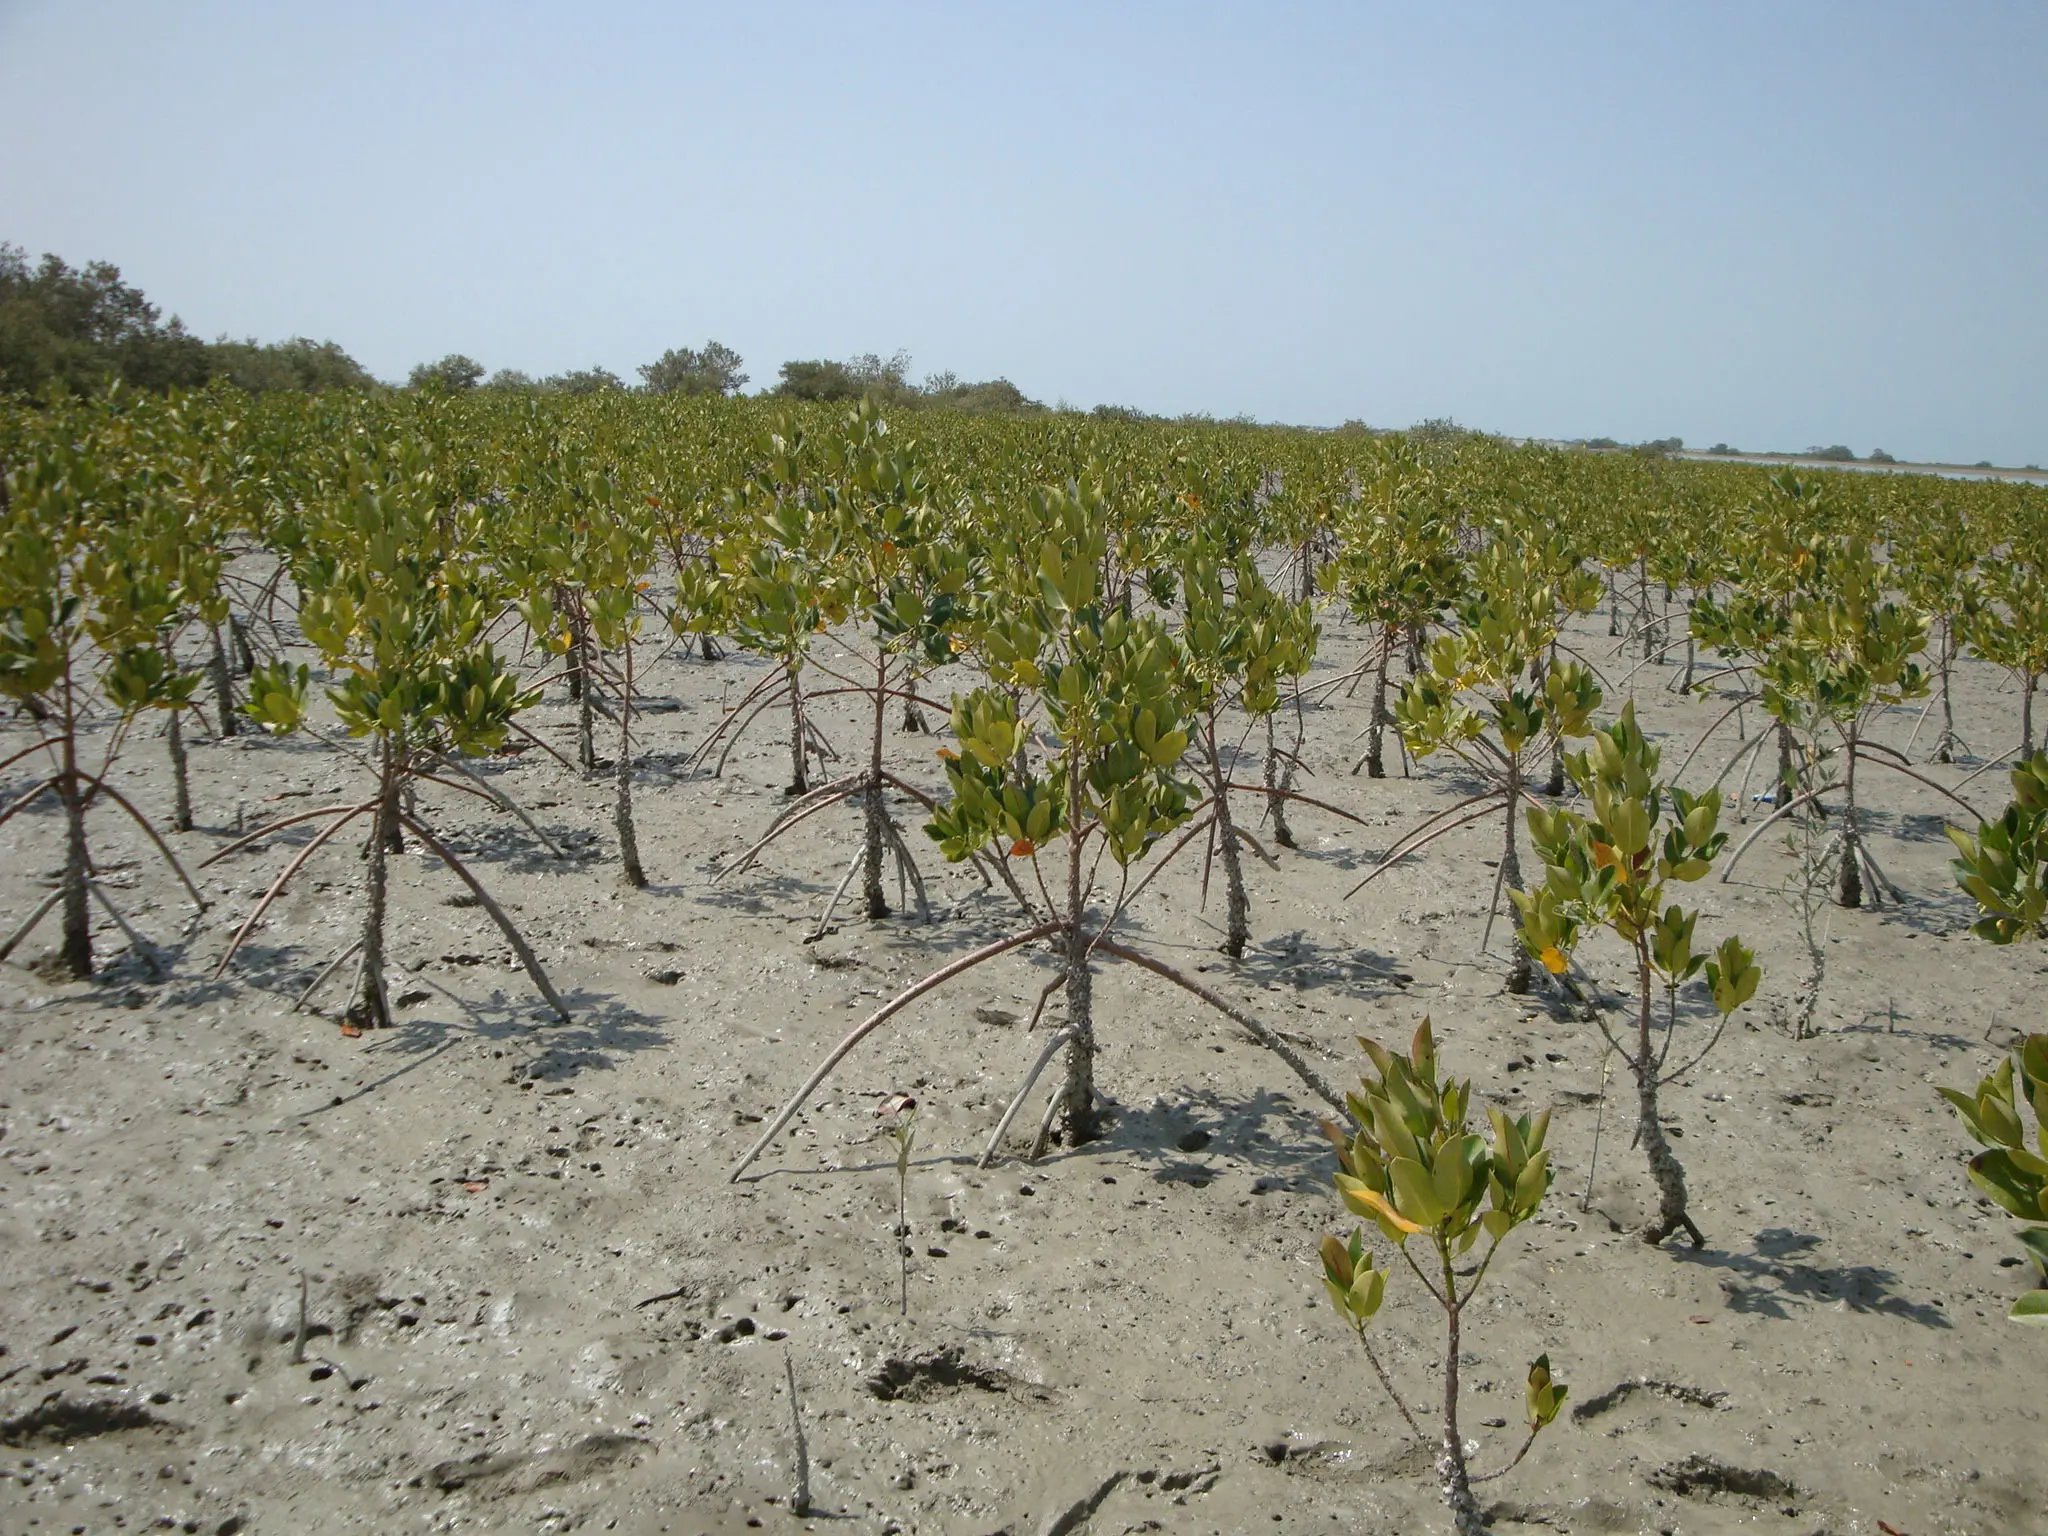 A field of tiny mangrove saplings planted in deep silt